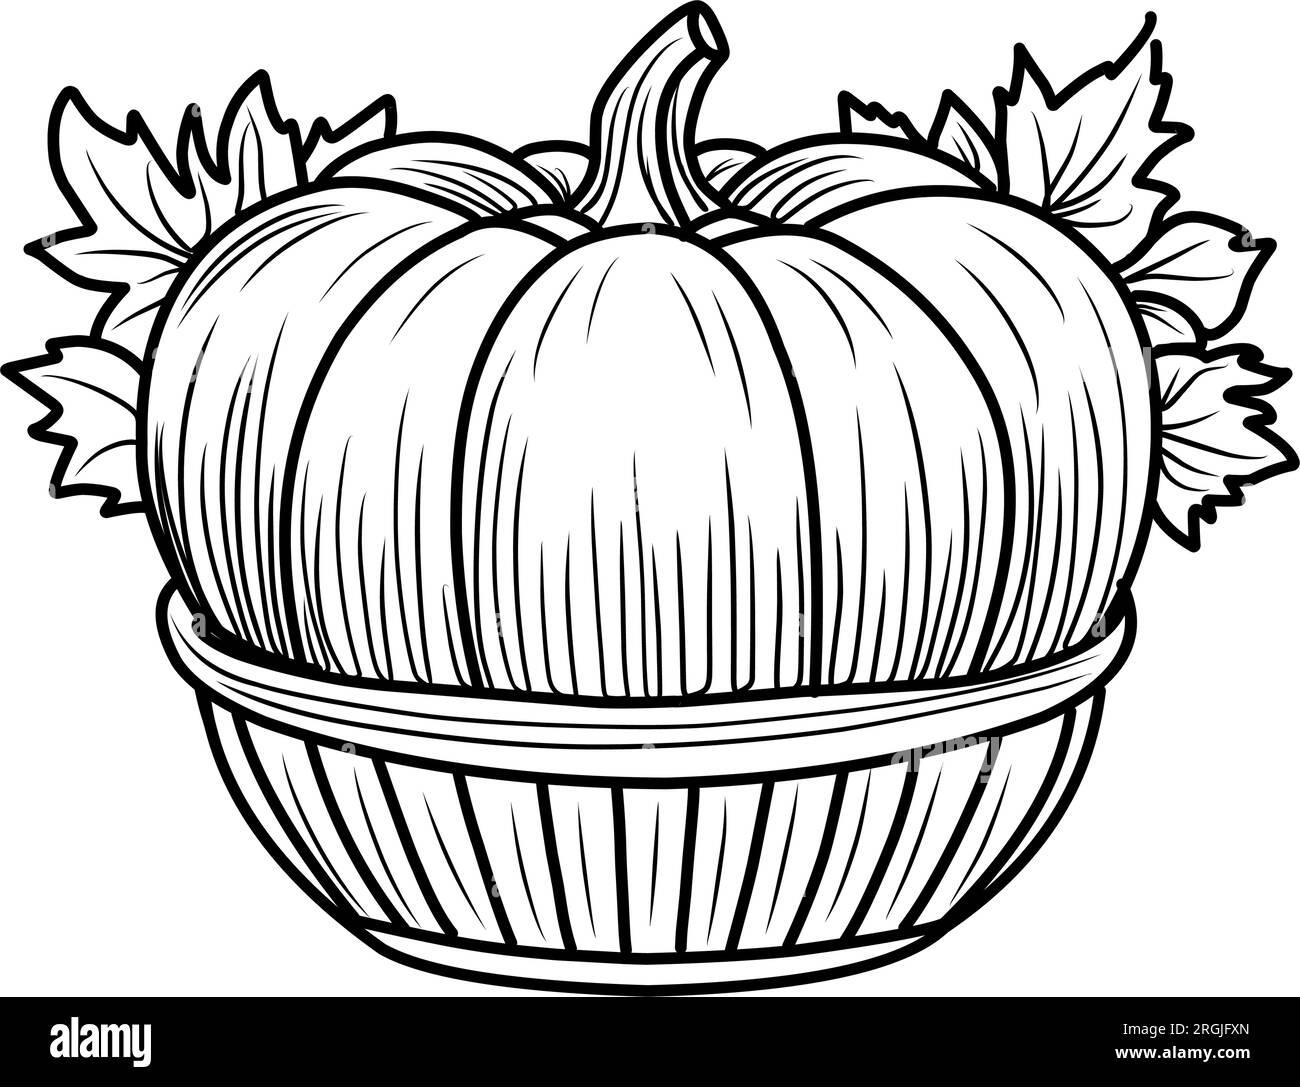 Coloring page with pumpkins and sunflowers autumn position for coloring black and white linear illustration stock vector image art